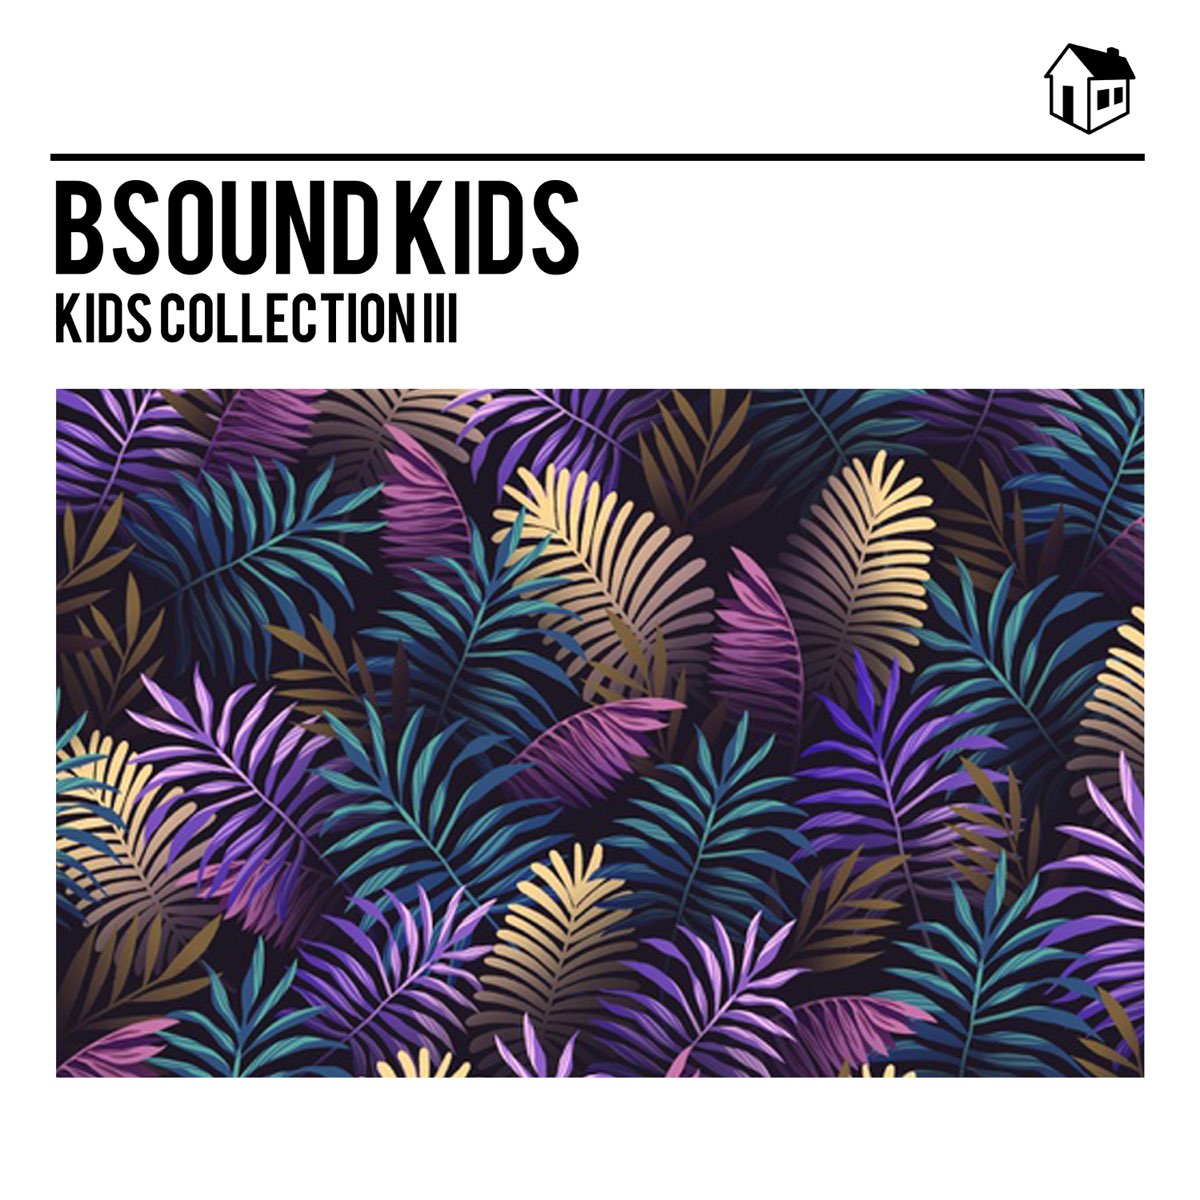 ‎Kids Collection III - Album by Bsound Kids - Apple Music